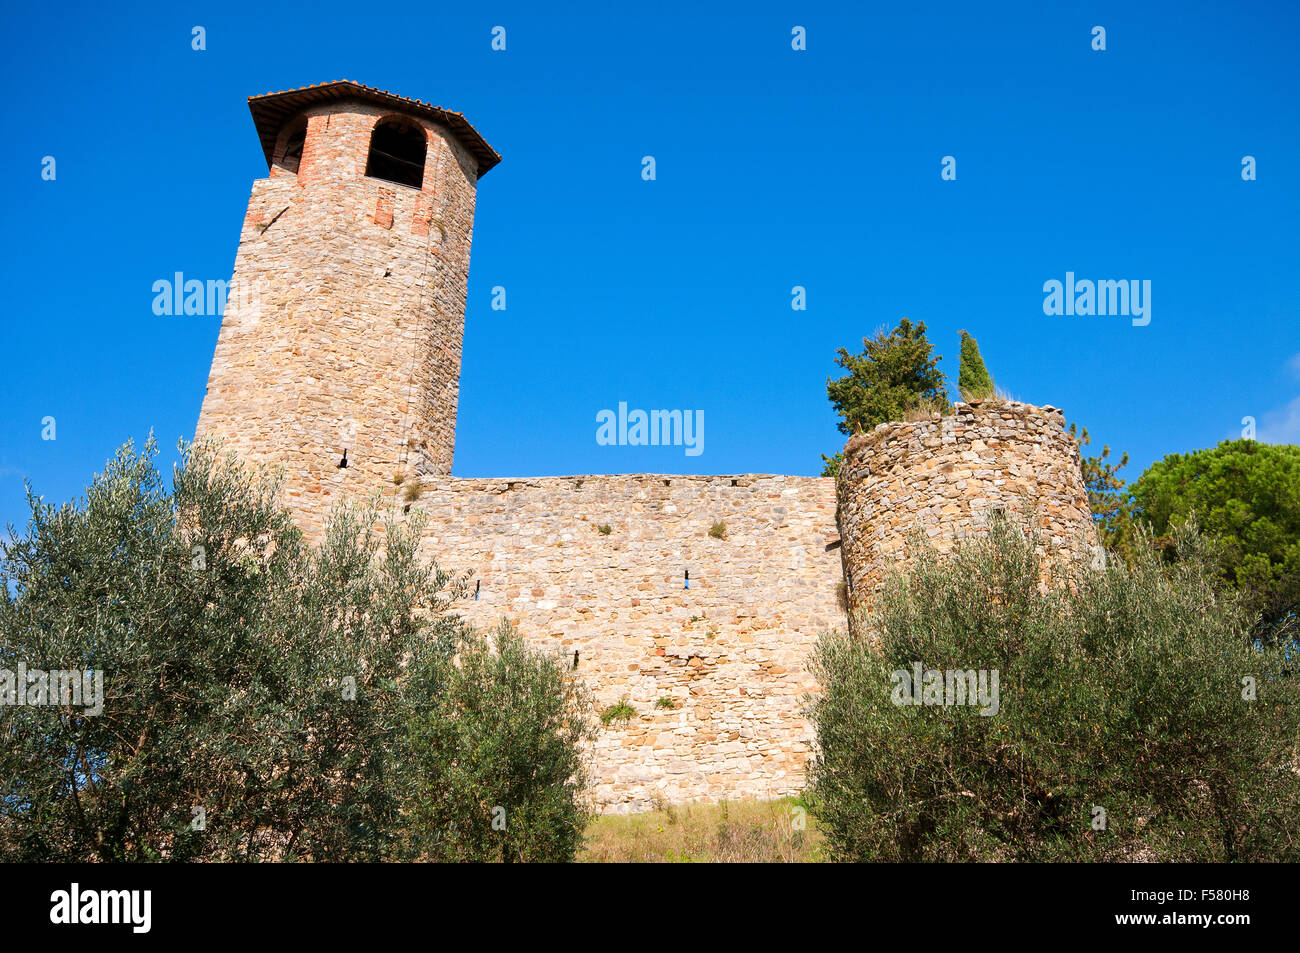 Remains of the castle of Cibottola with tower, ancient village near Pietrafitta, Umbria, Italy Stock Photo